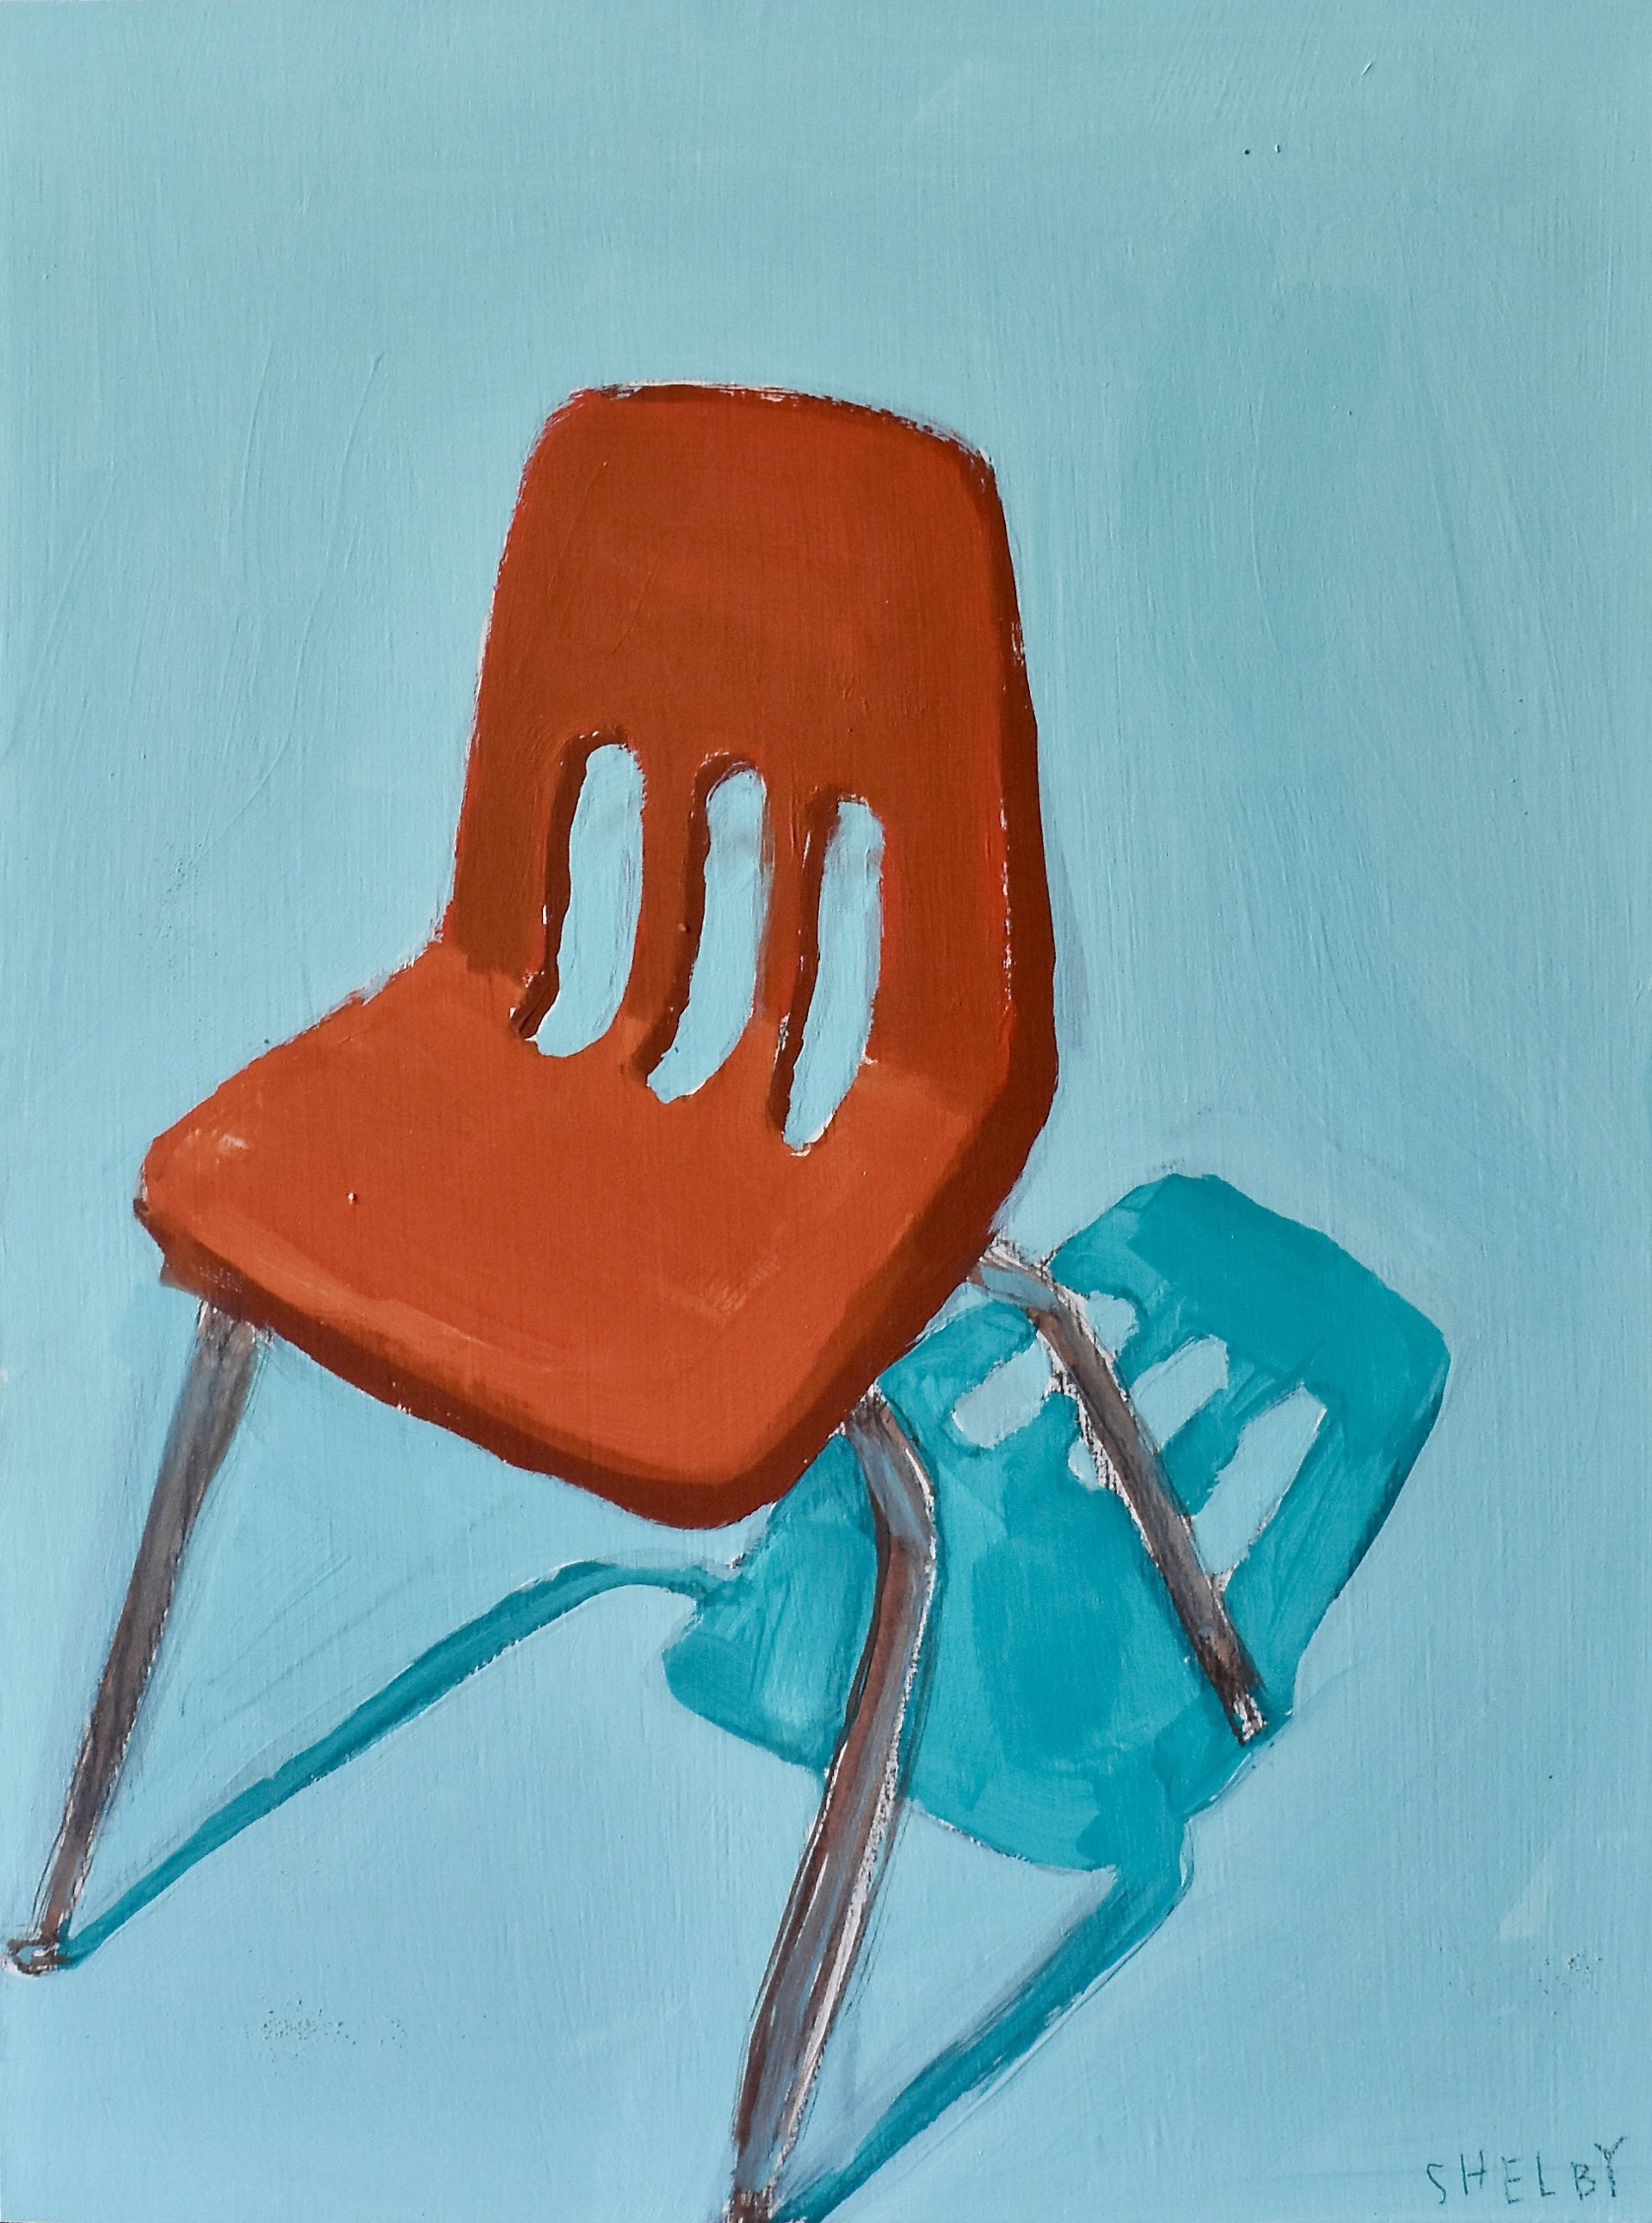 Red School Chair by Shelby Monteverde